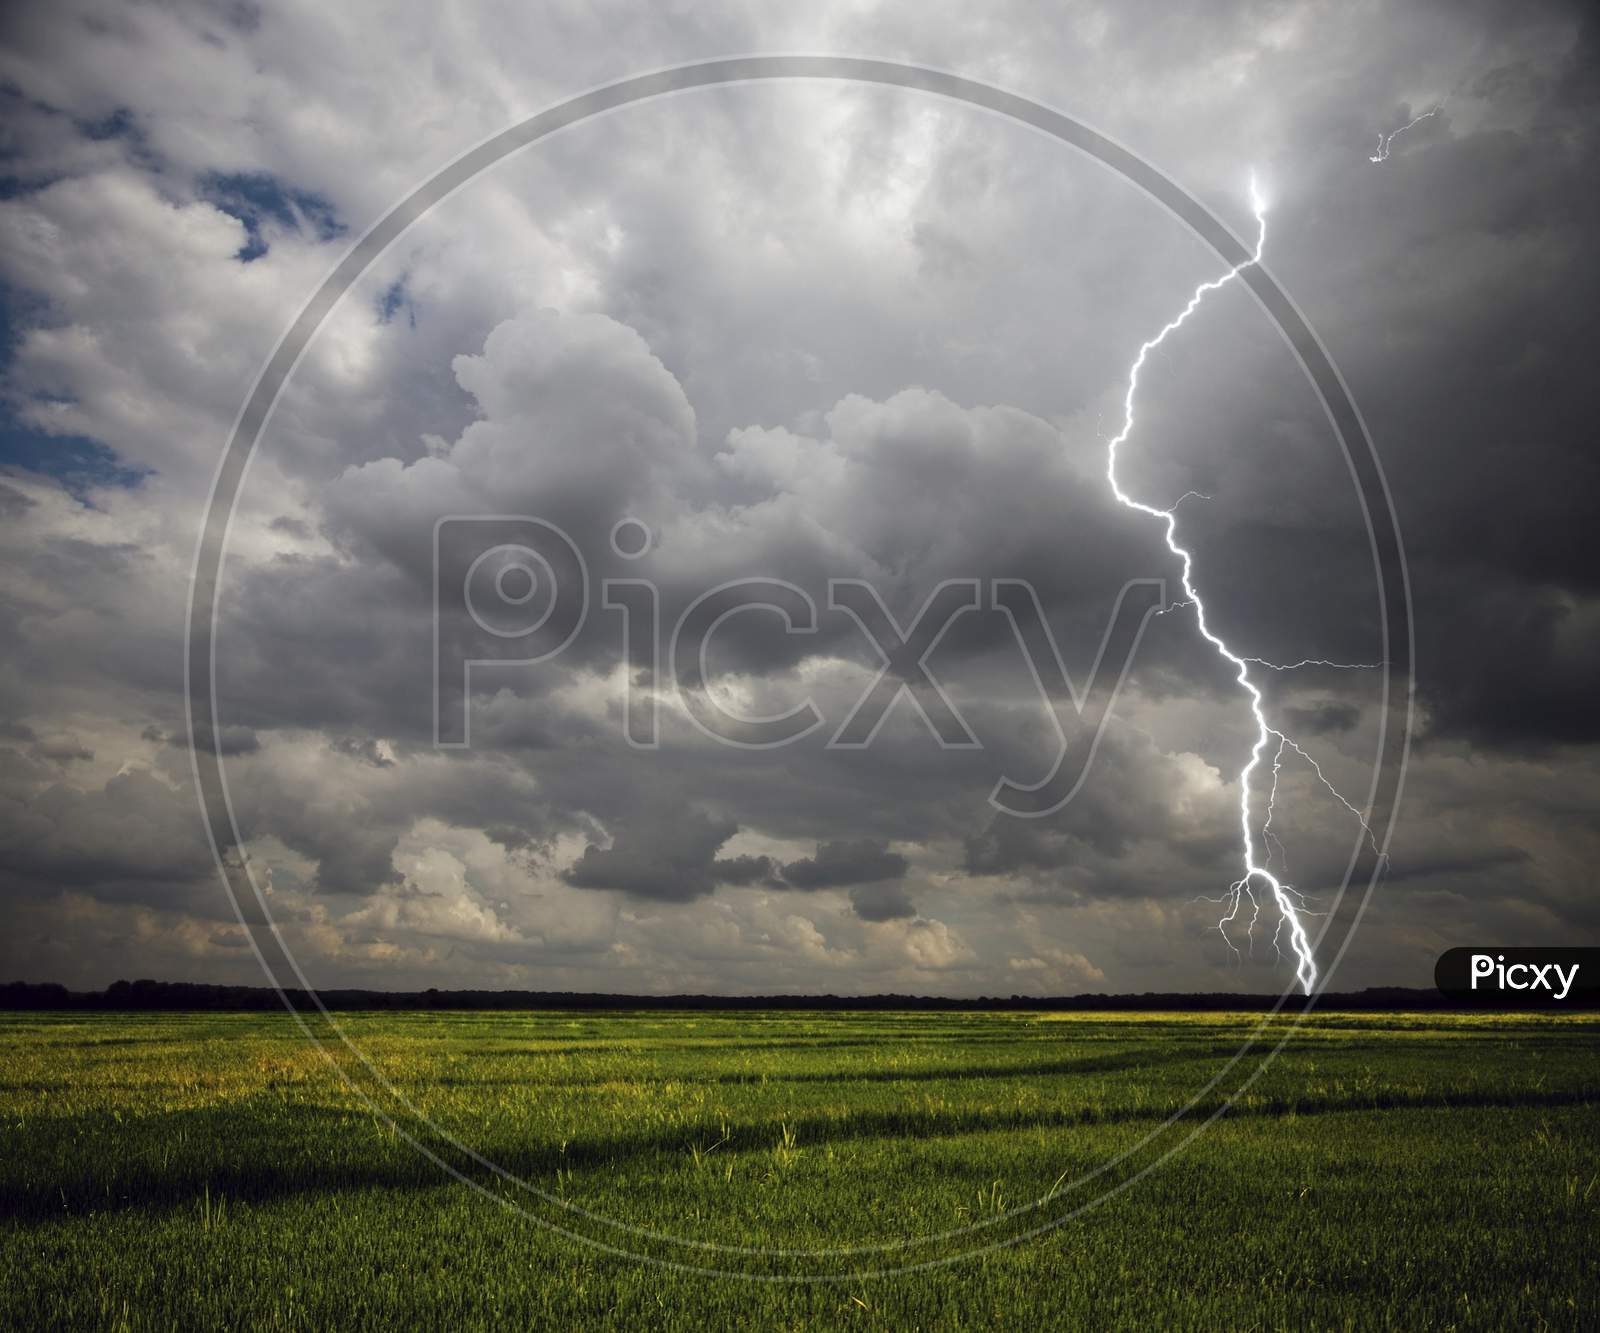 Lightning in the field-Purple coloured lightning in the sky-lightning, storm, thunder, electricity, sky, bolt, electric,purple flash, weather, thunderstorm, night, abstract, light, rain, strike, energy, nature, cloudy day